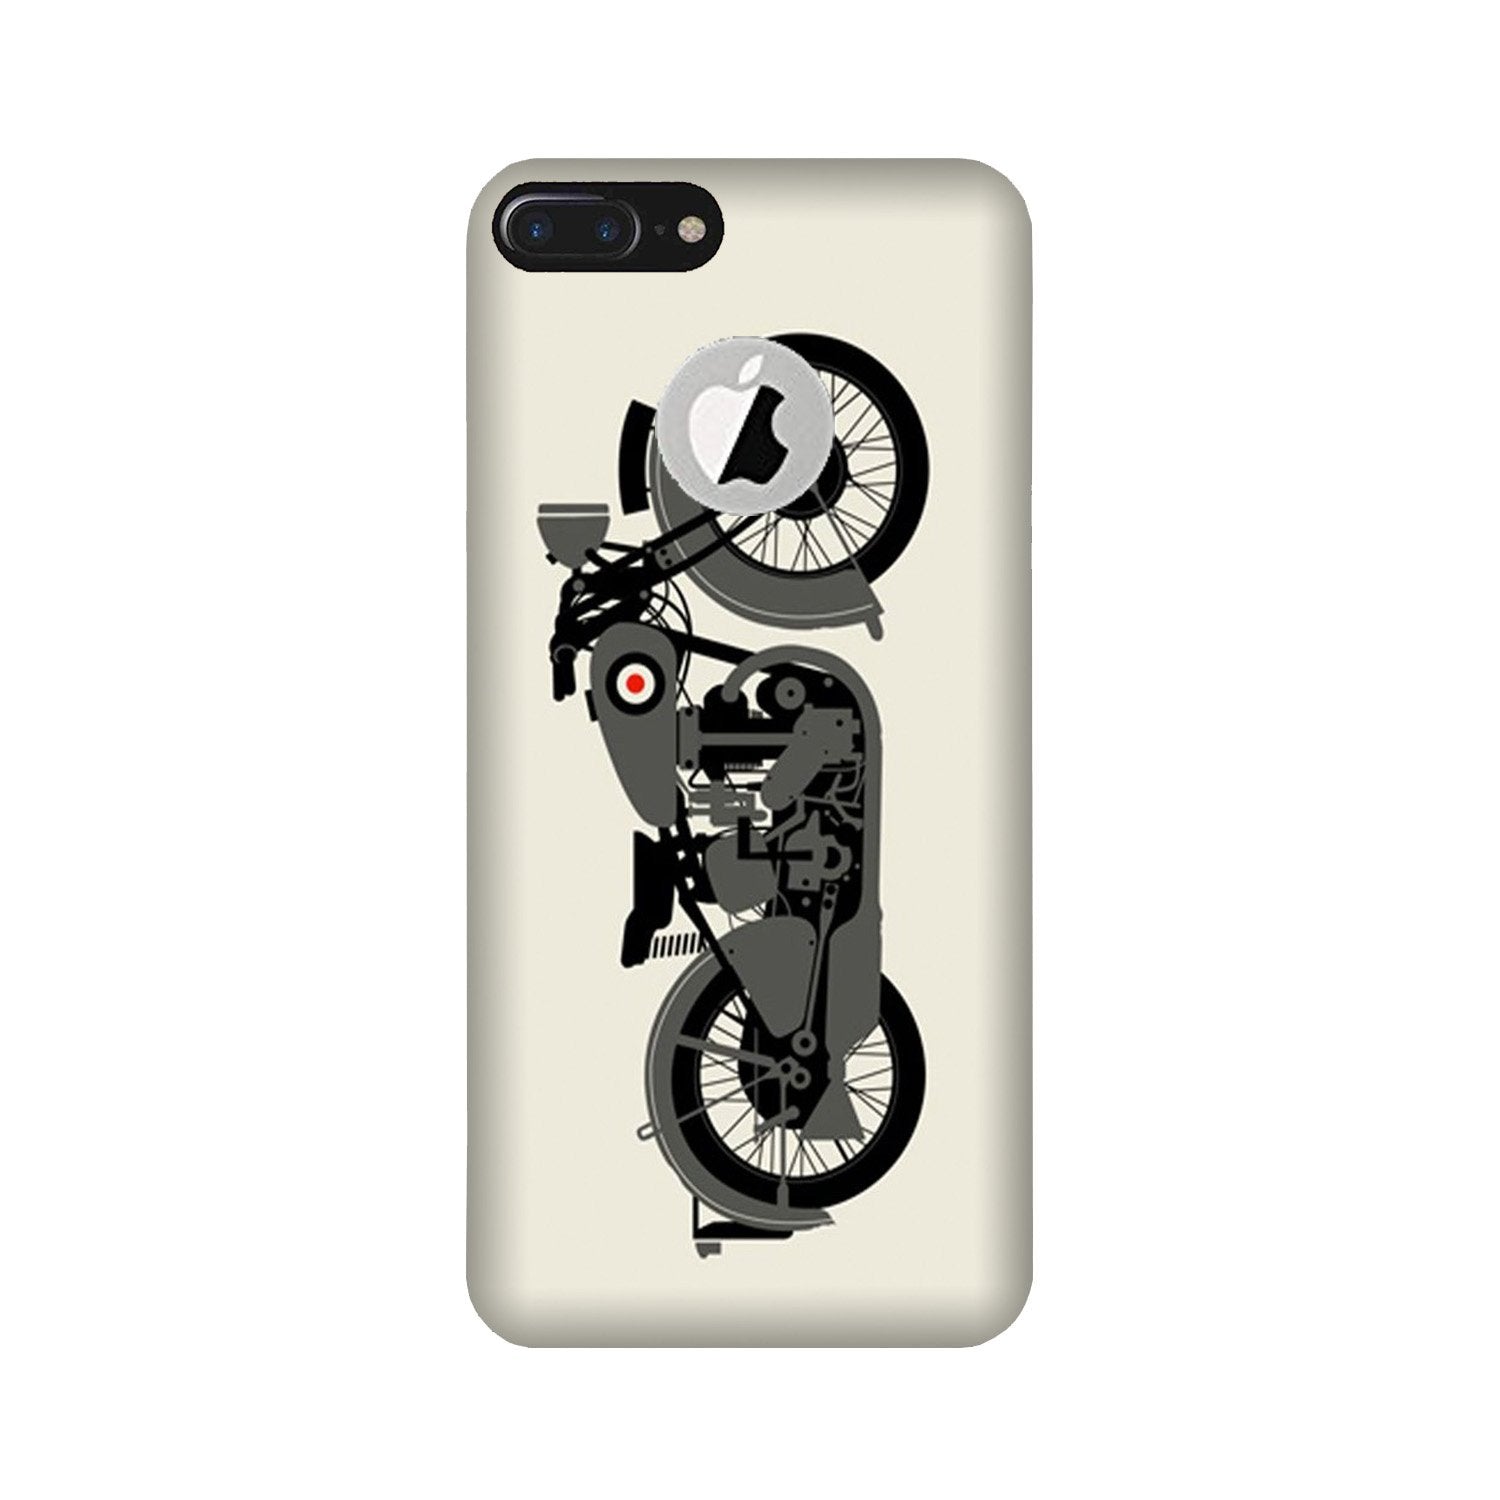 MotorCycle Case for iPhone 7 Plus logo cut (Design No. 259)